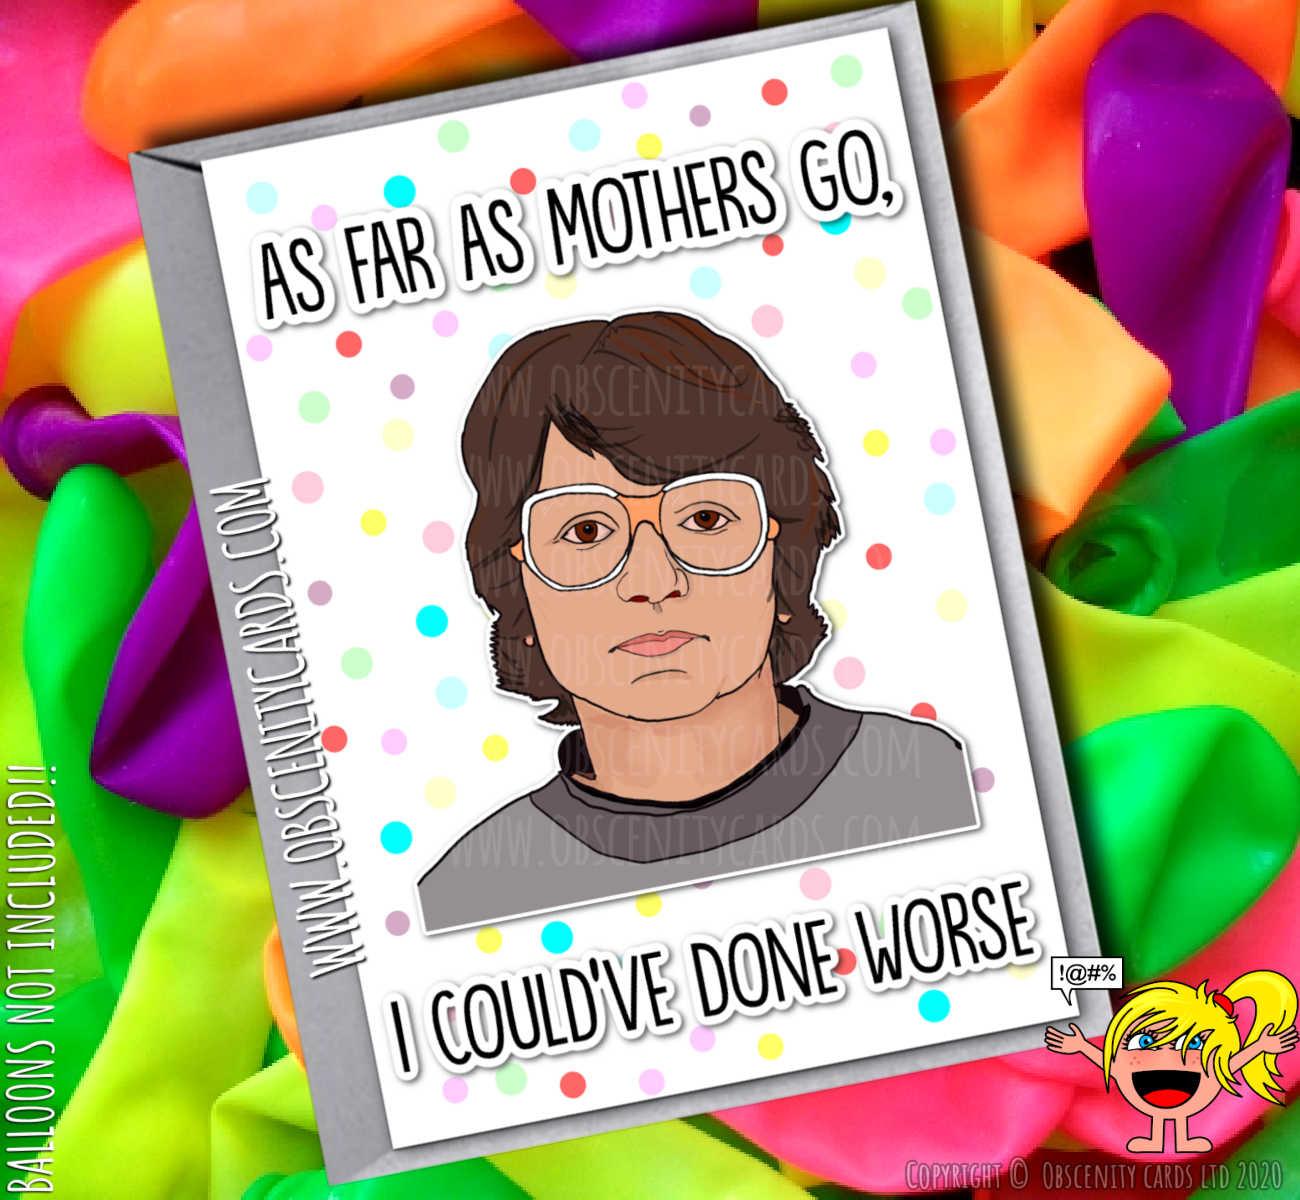 AS FAR AS MOTHERS GO, I COULD'VE DONE WORSE ROSE WEST MOTHERS DAY BIRTHDAY CARD